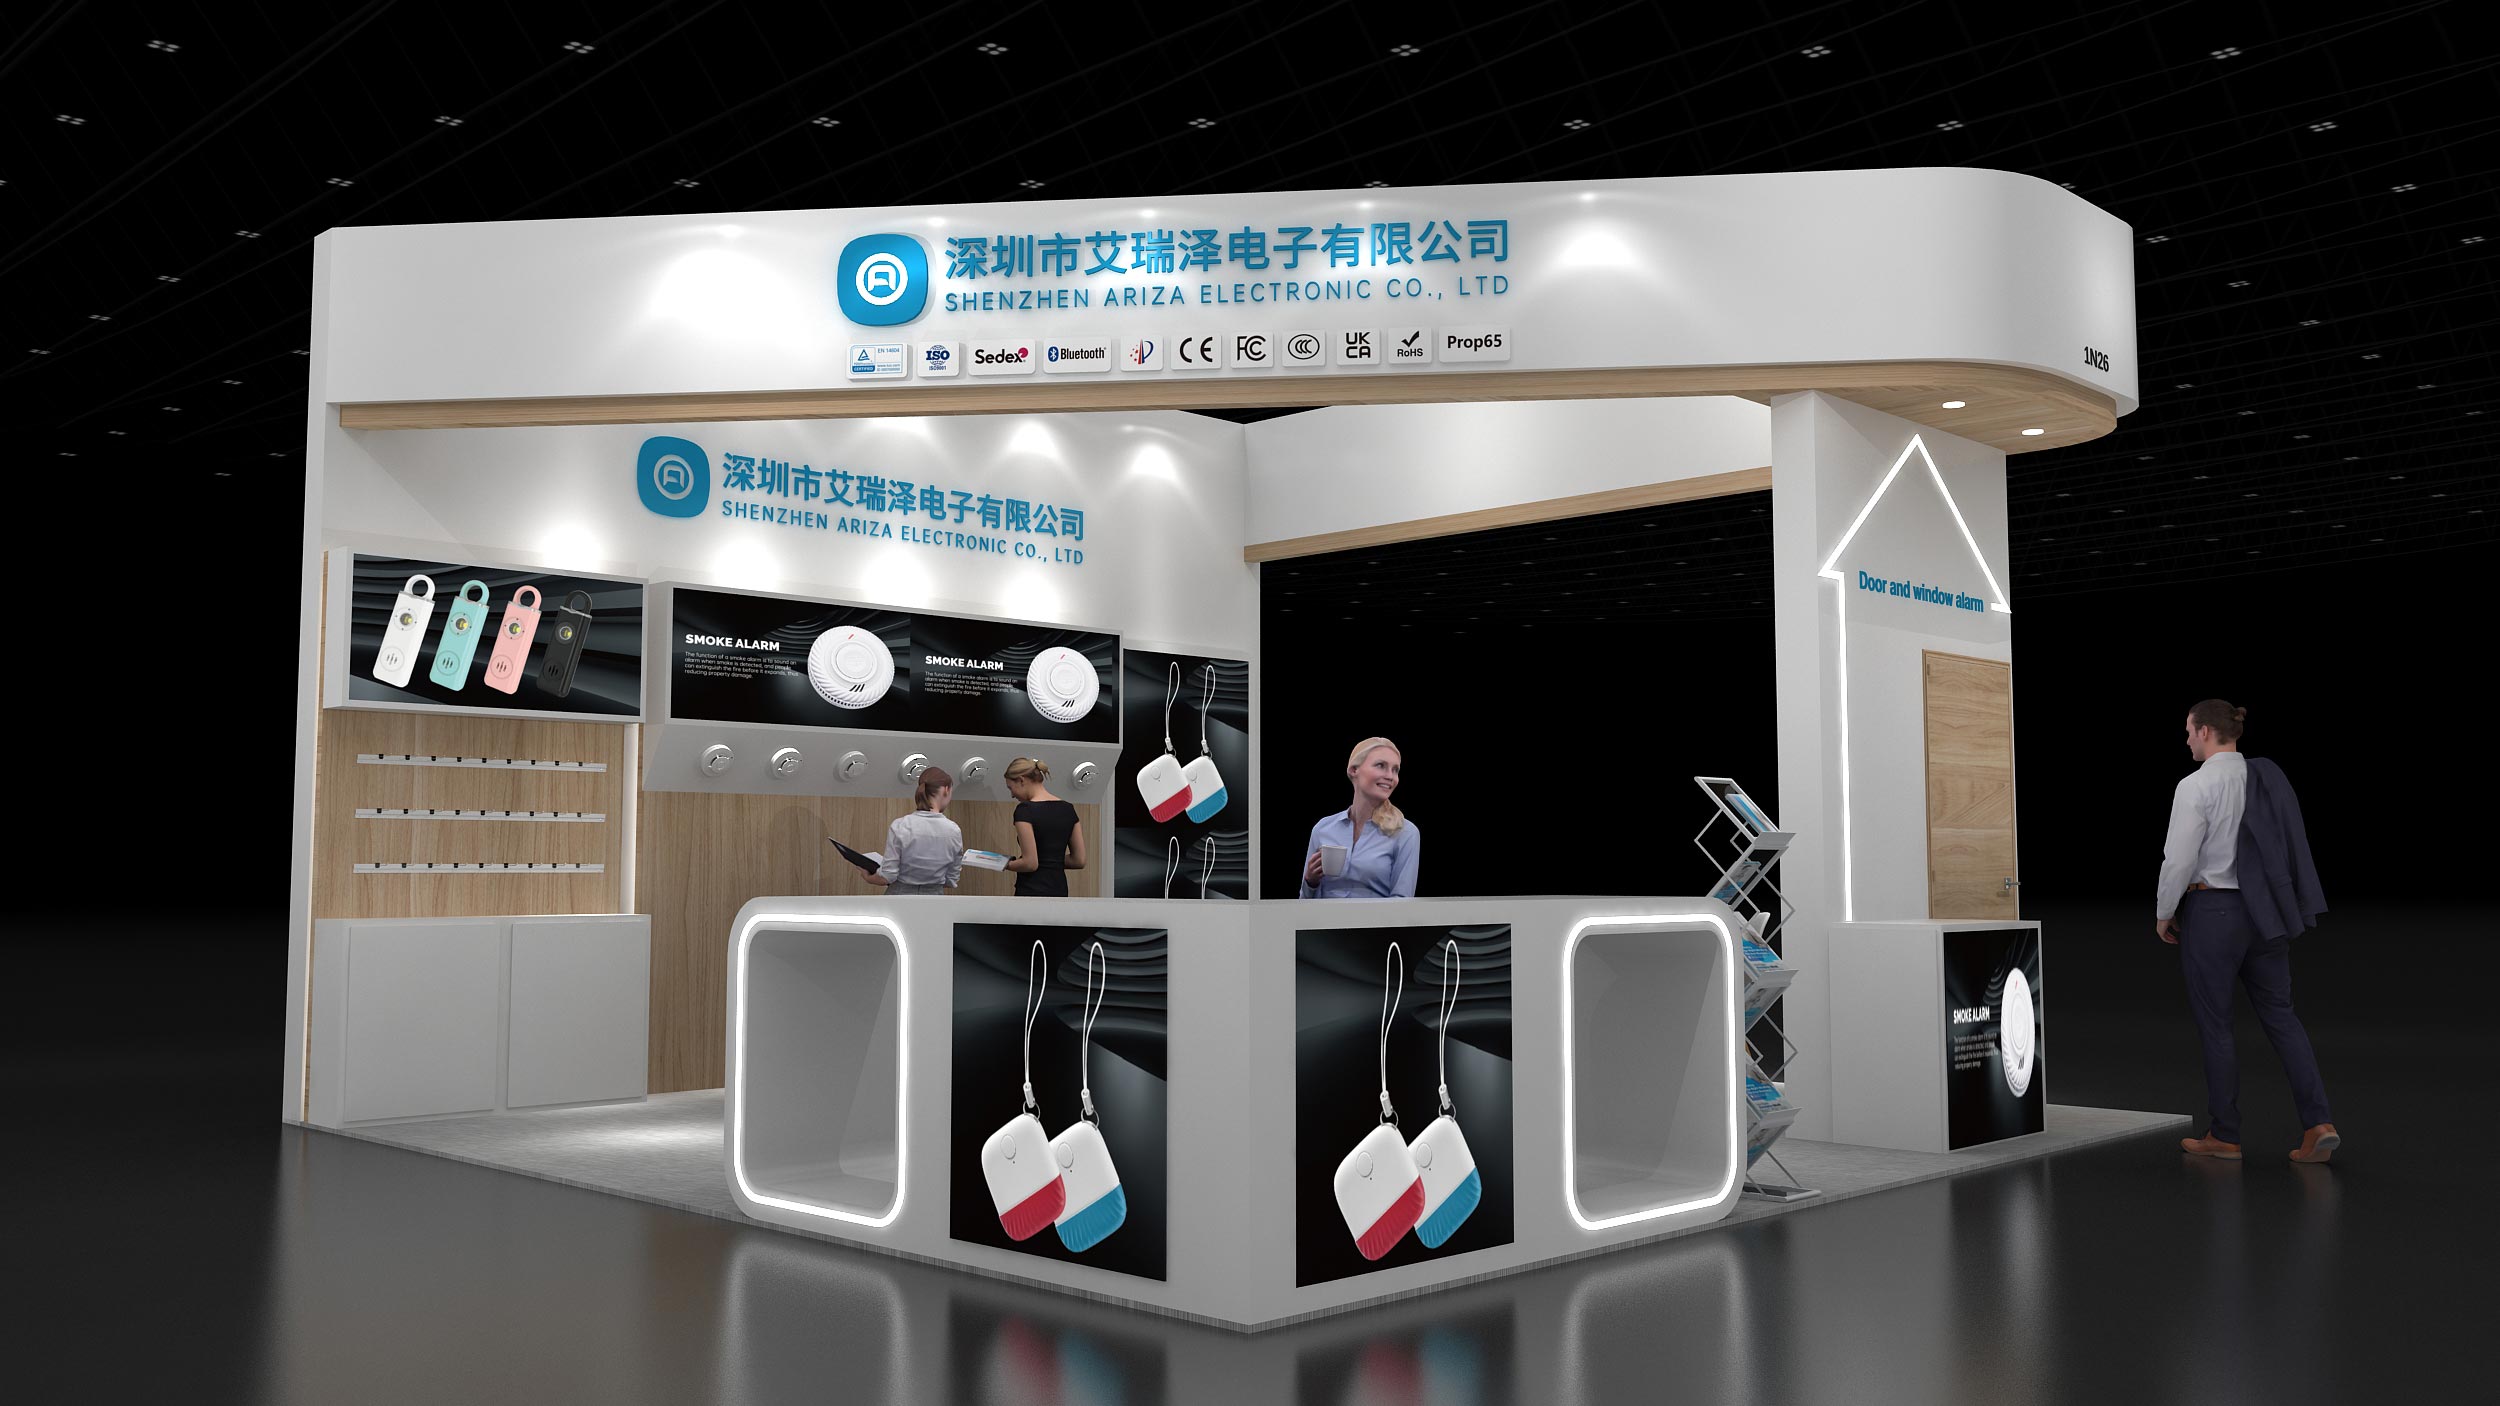 2024 Spring Global Sources Smart Home Security and Home Appliances Exhibition, smoke alarm, security alarm, ariza, OEM ODM factory (1).jpg